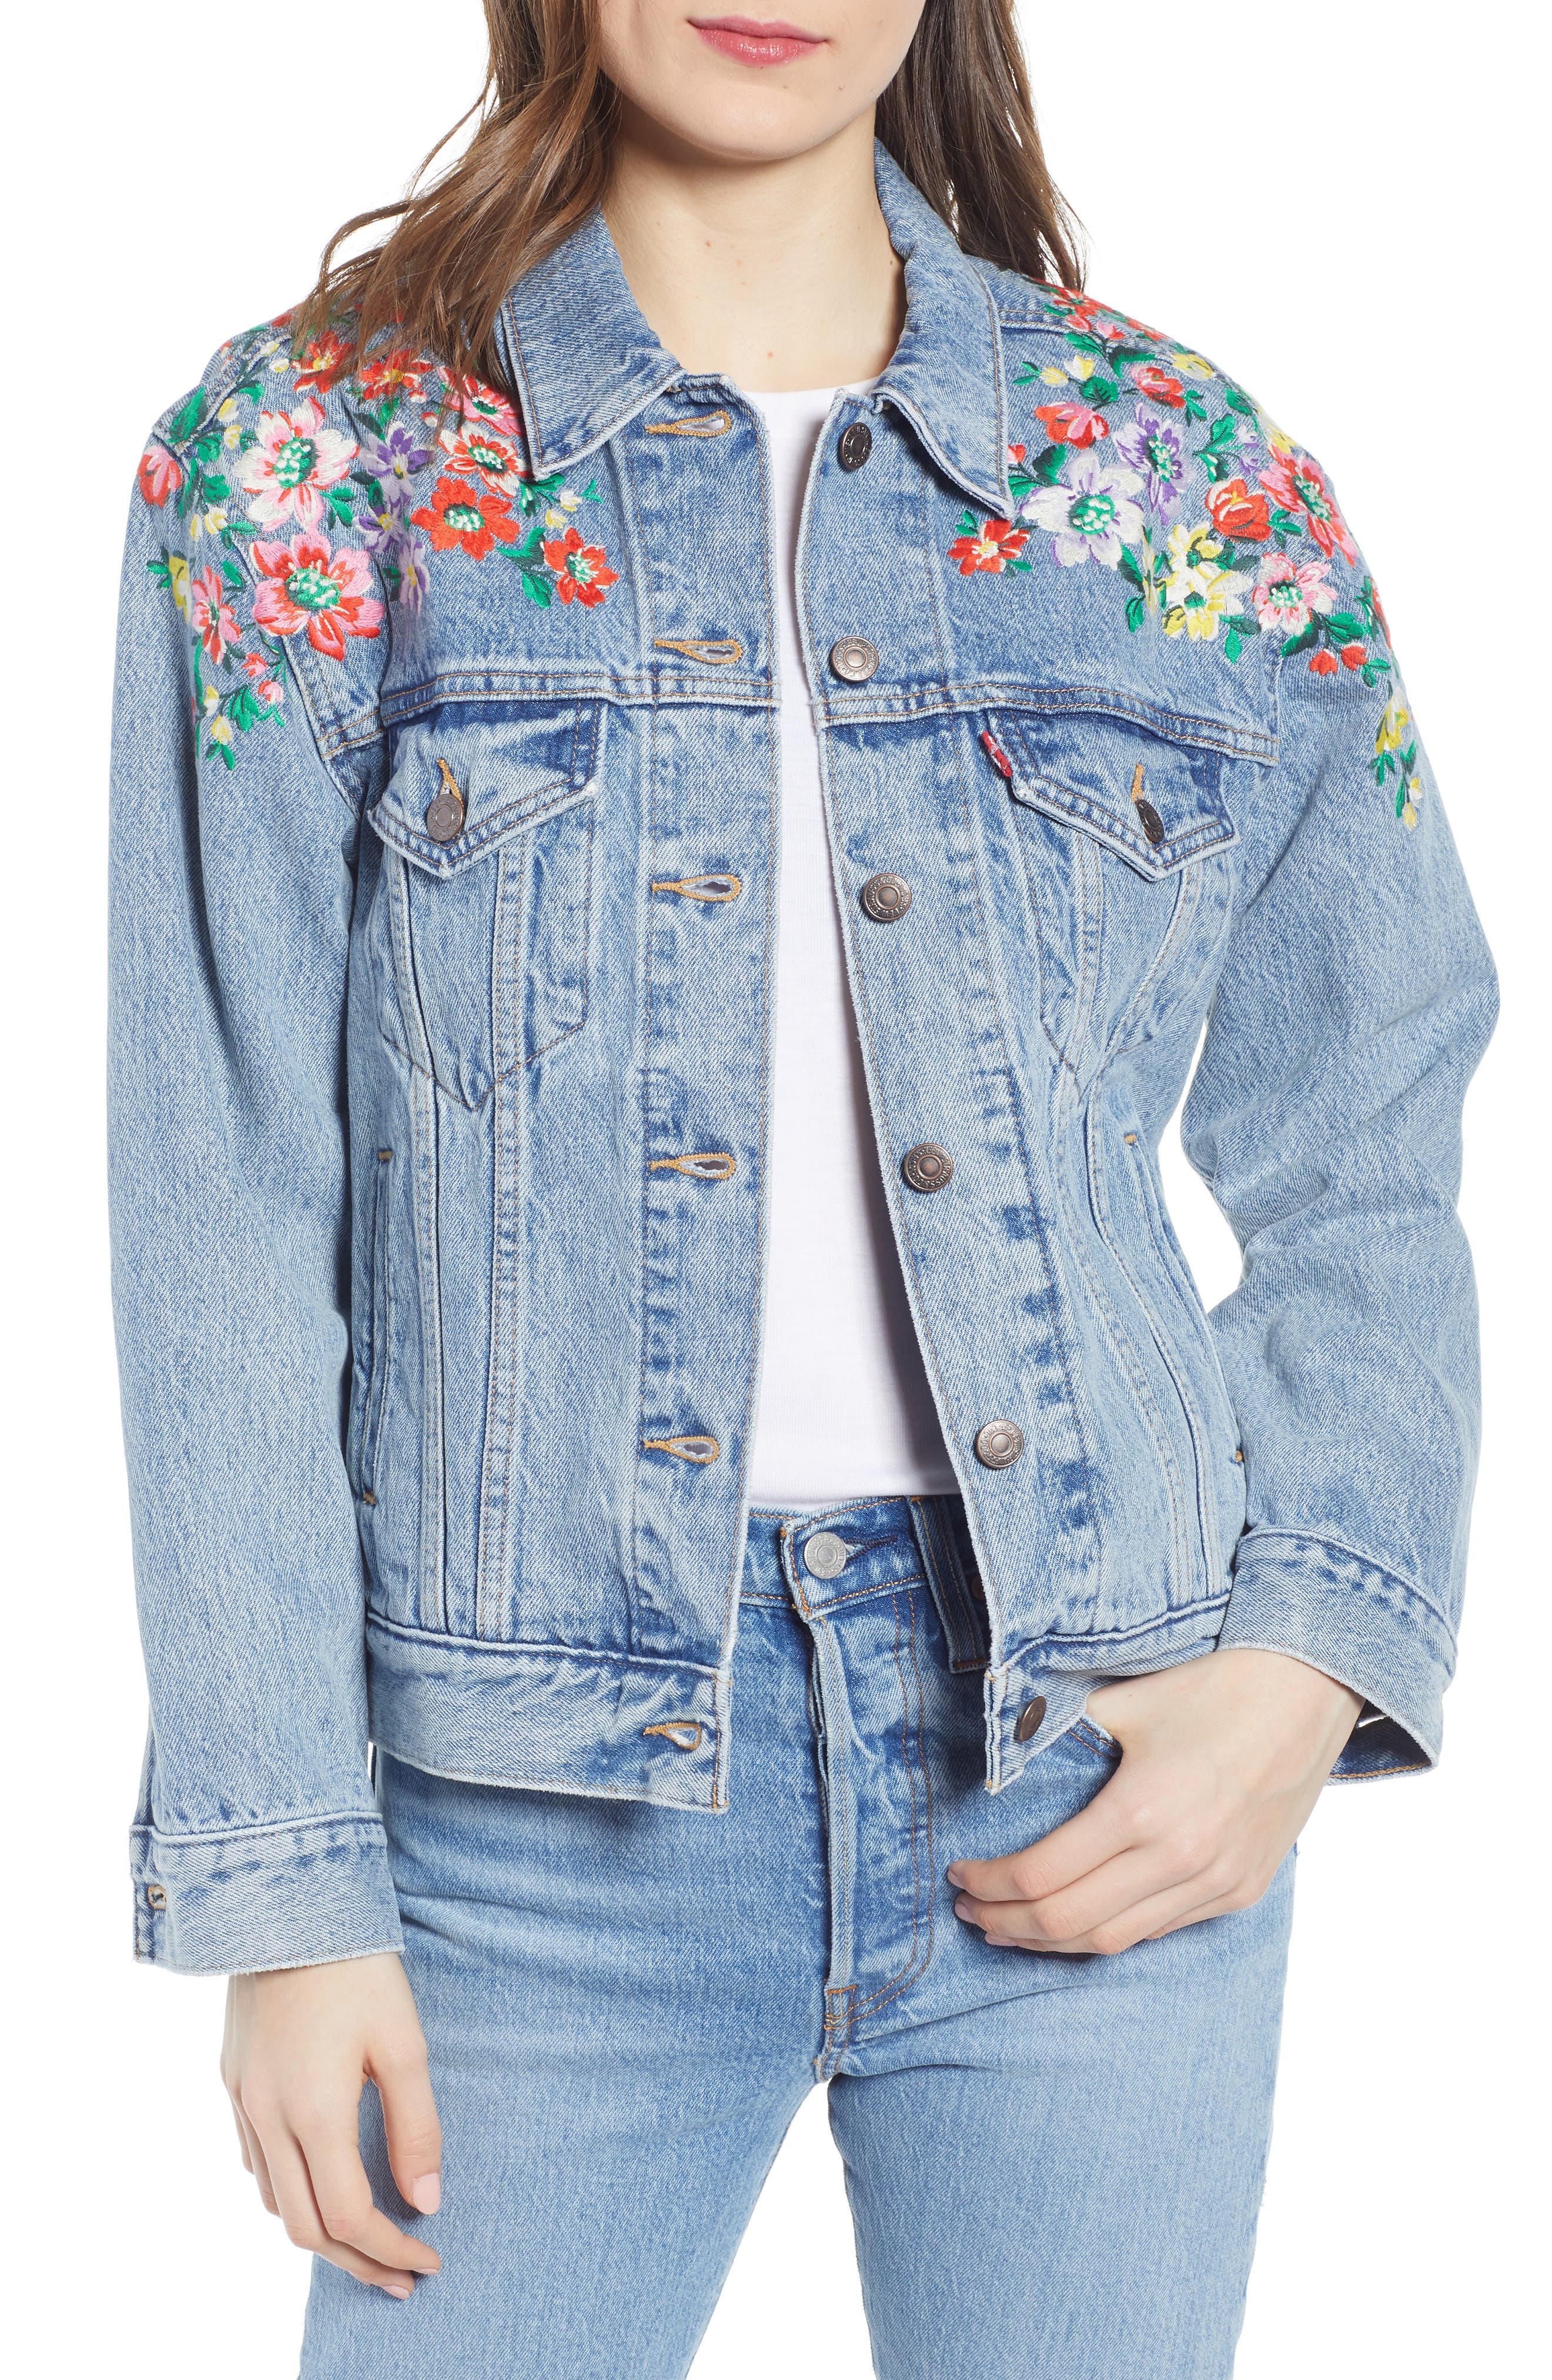 embroidered levis jacket